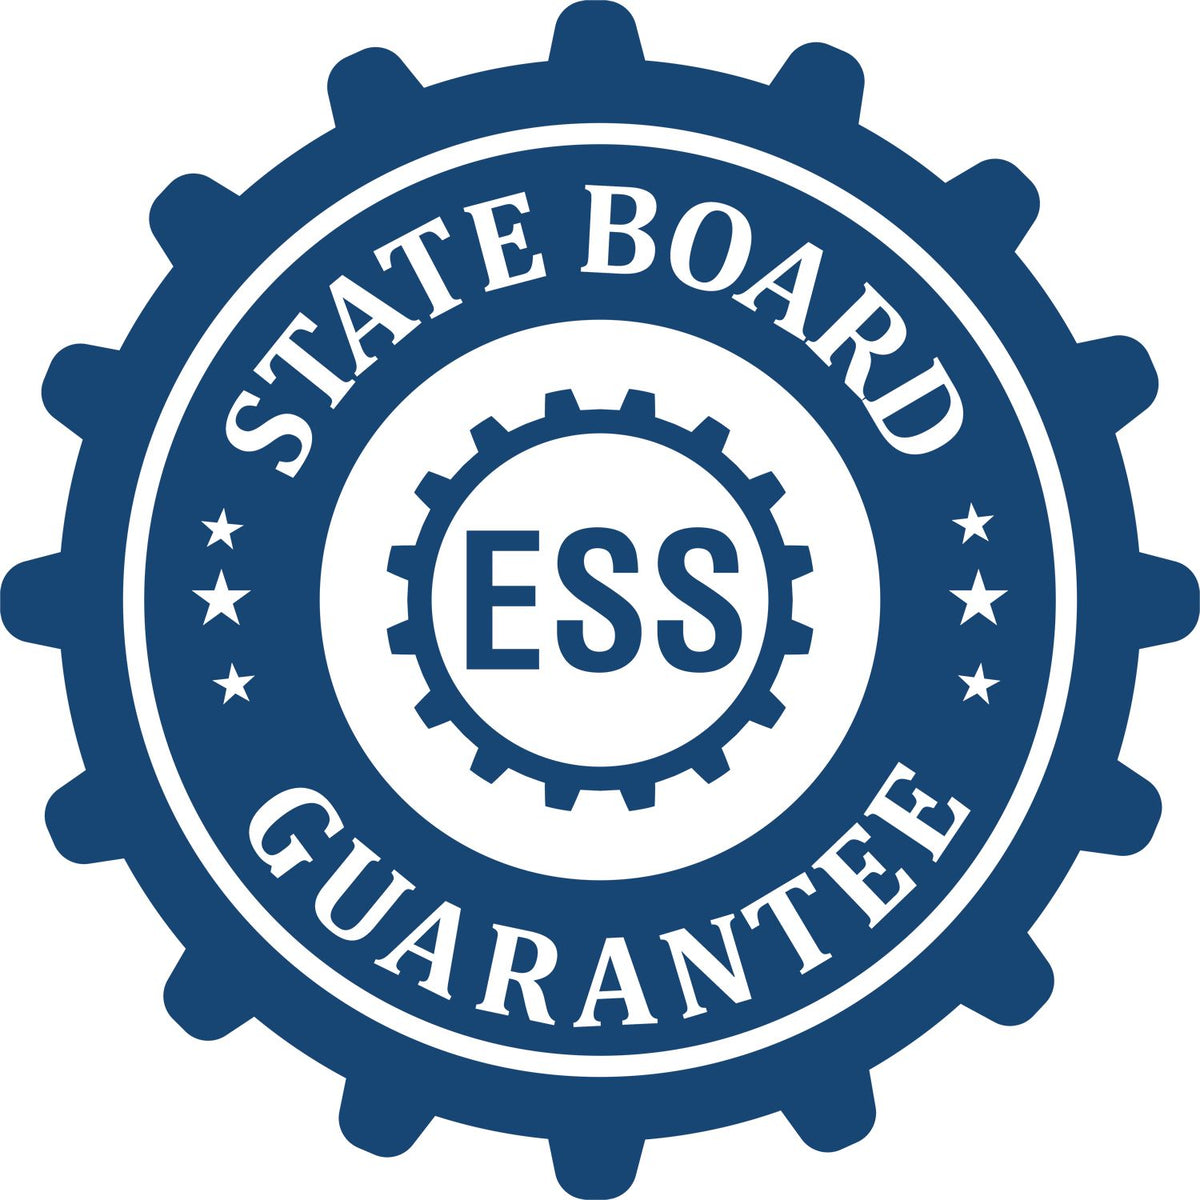 An emblem in a gear shape illustrating a state board guarantee for the Digital Pennsylvania Landscape Architect Stamp product.